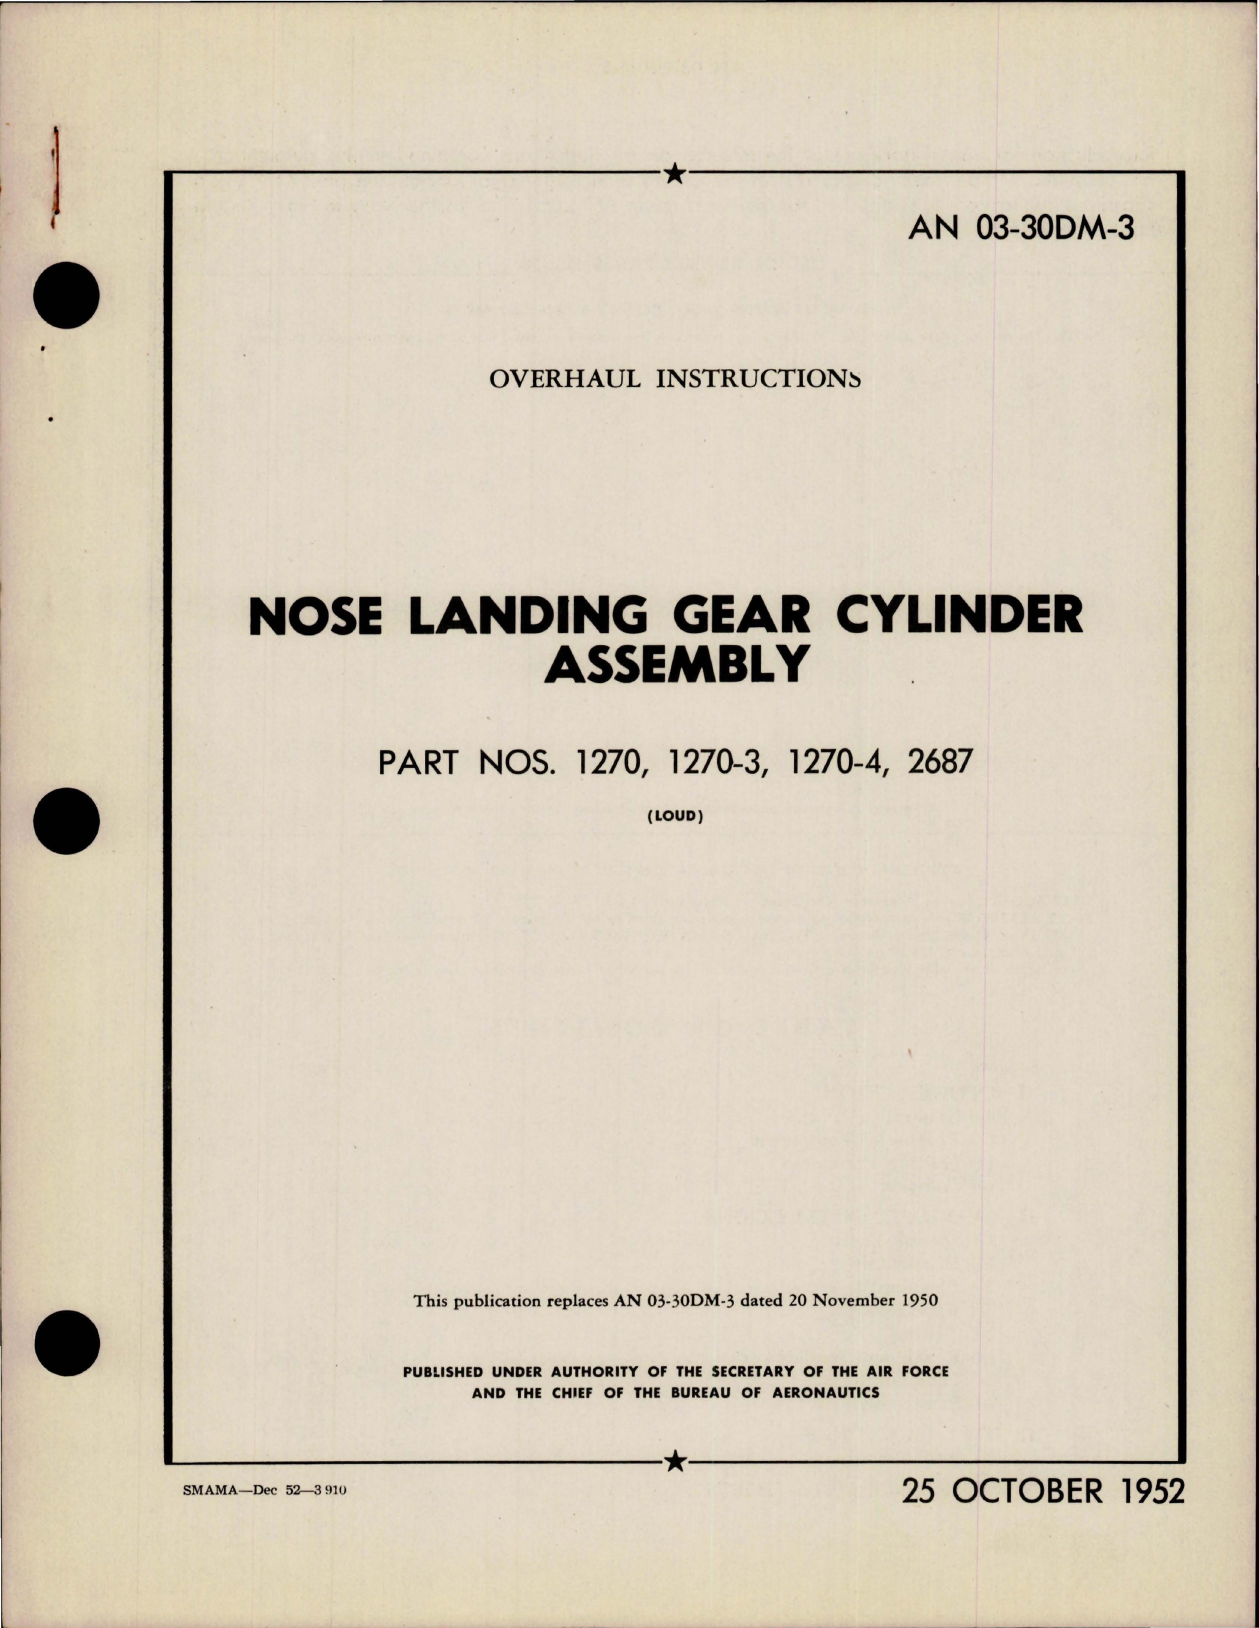 Sample page 1 from AirCorps Library document: Overhaul Instructions for Nose Landing Gear Cylinder Assembly  - Parts 1270, 1270-3, 1270-4, 2687